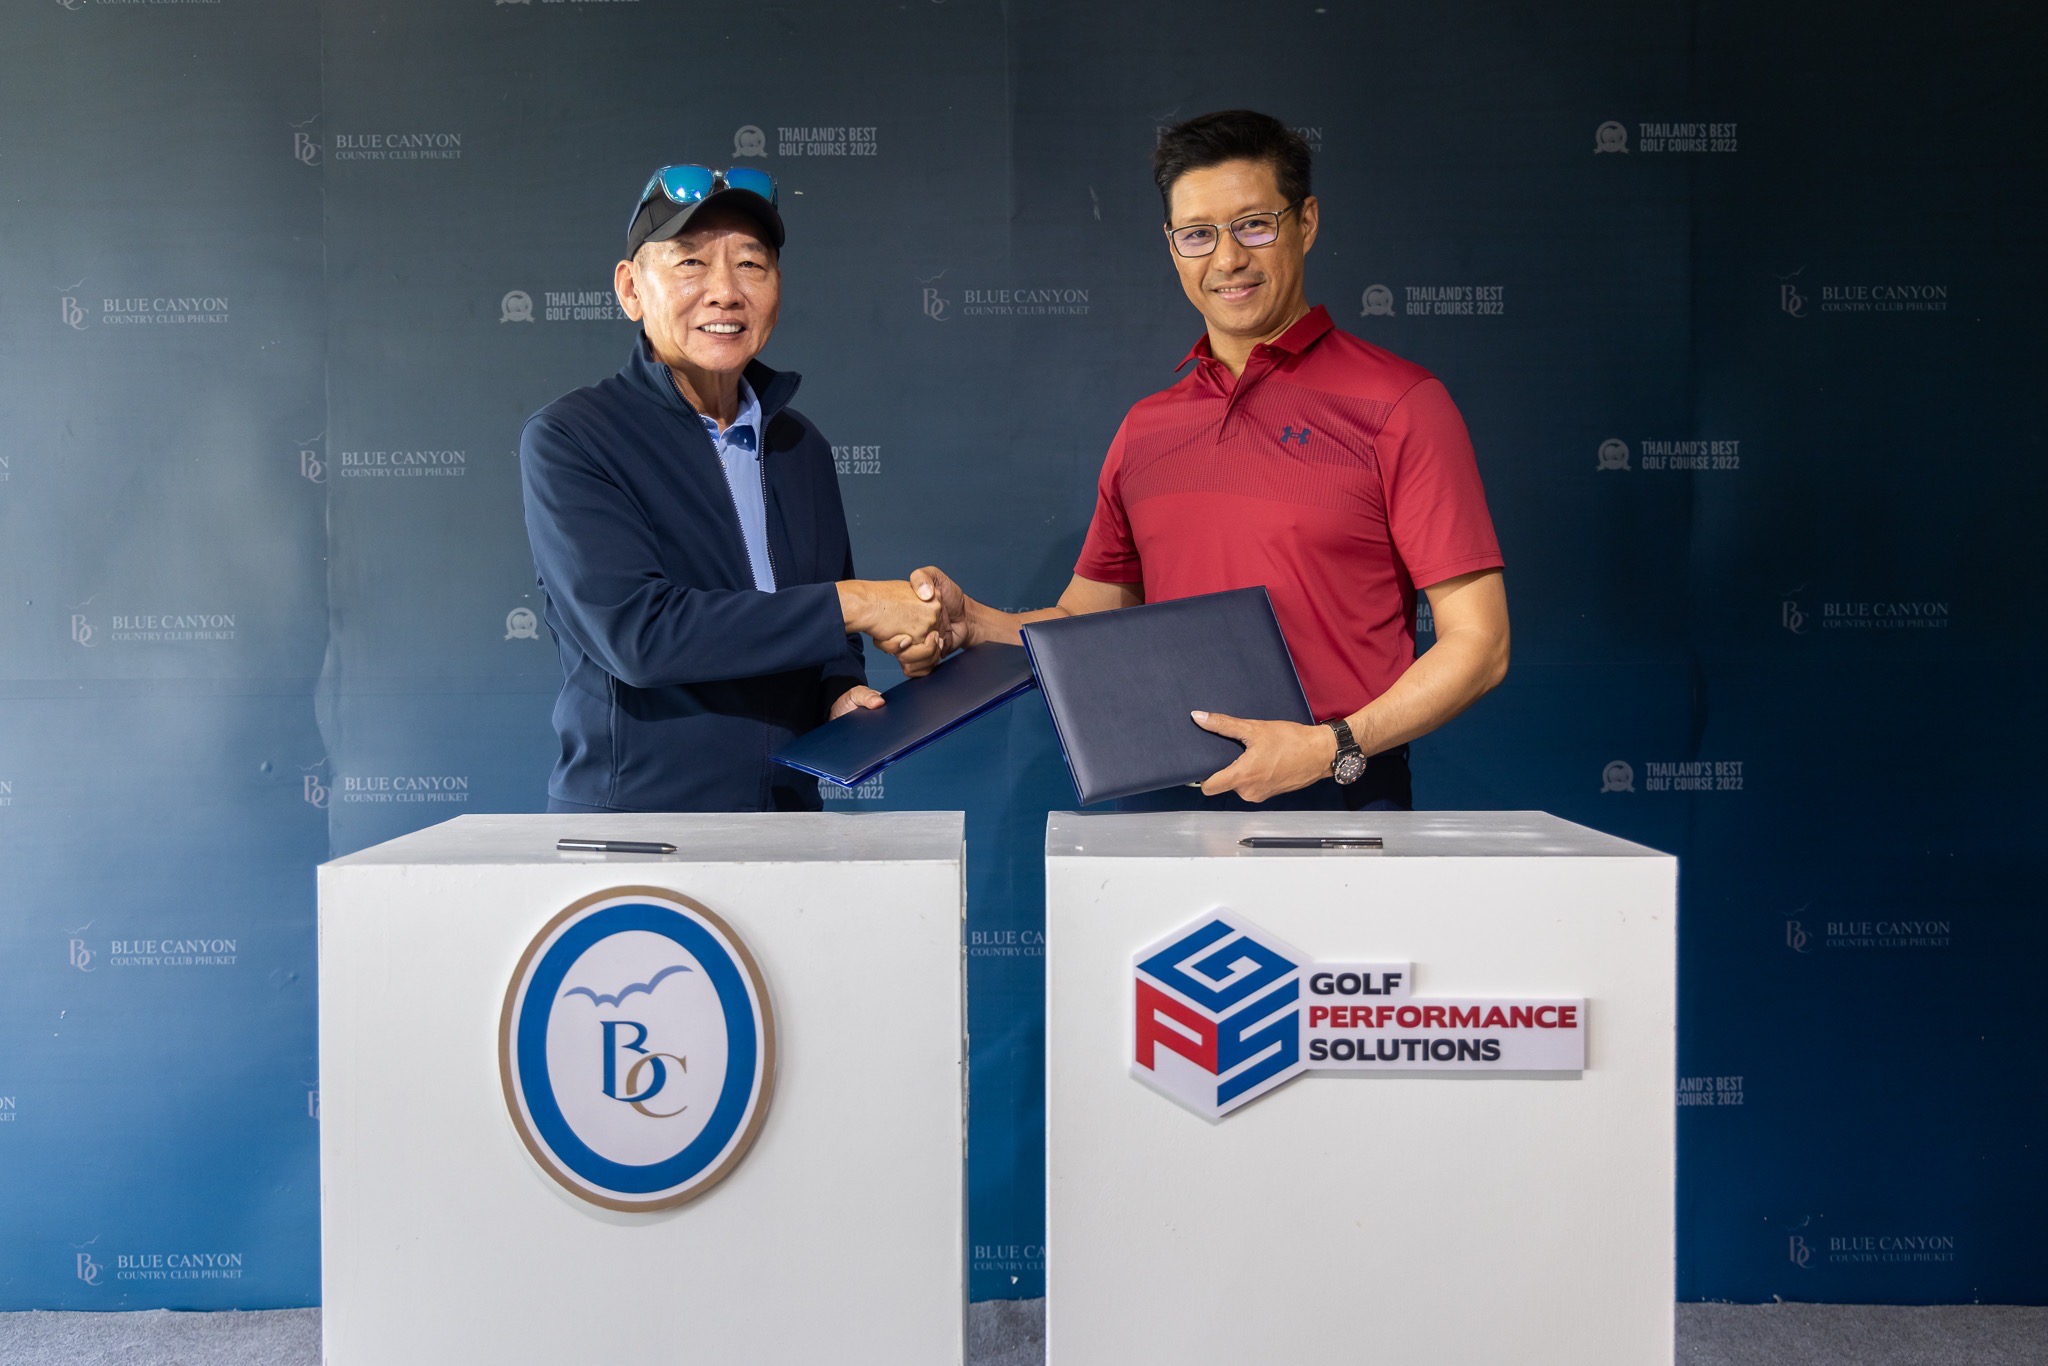 Blue Canyon Country Club, collaborates with the Korean Ladies Professional Golf Association (KLPGA) to host Thailand's inaugural KLPGA event on March 15-17